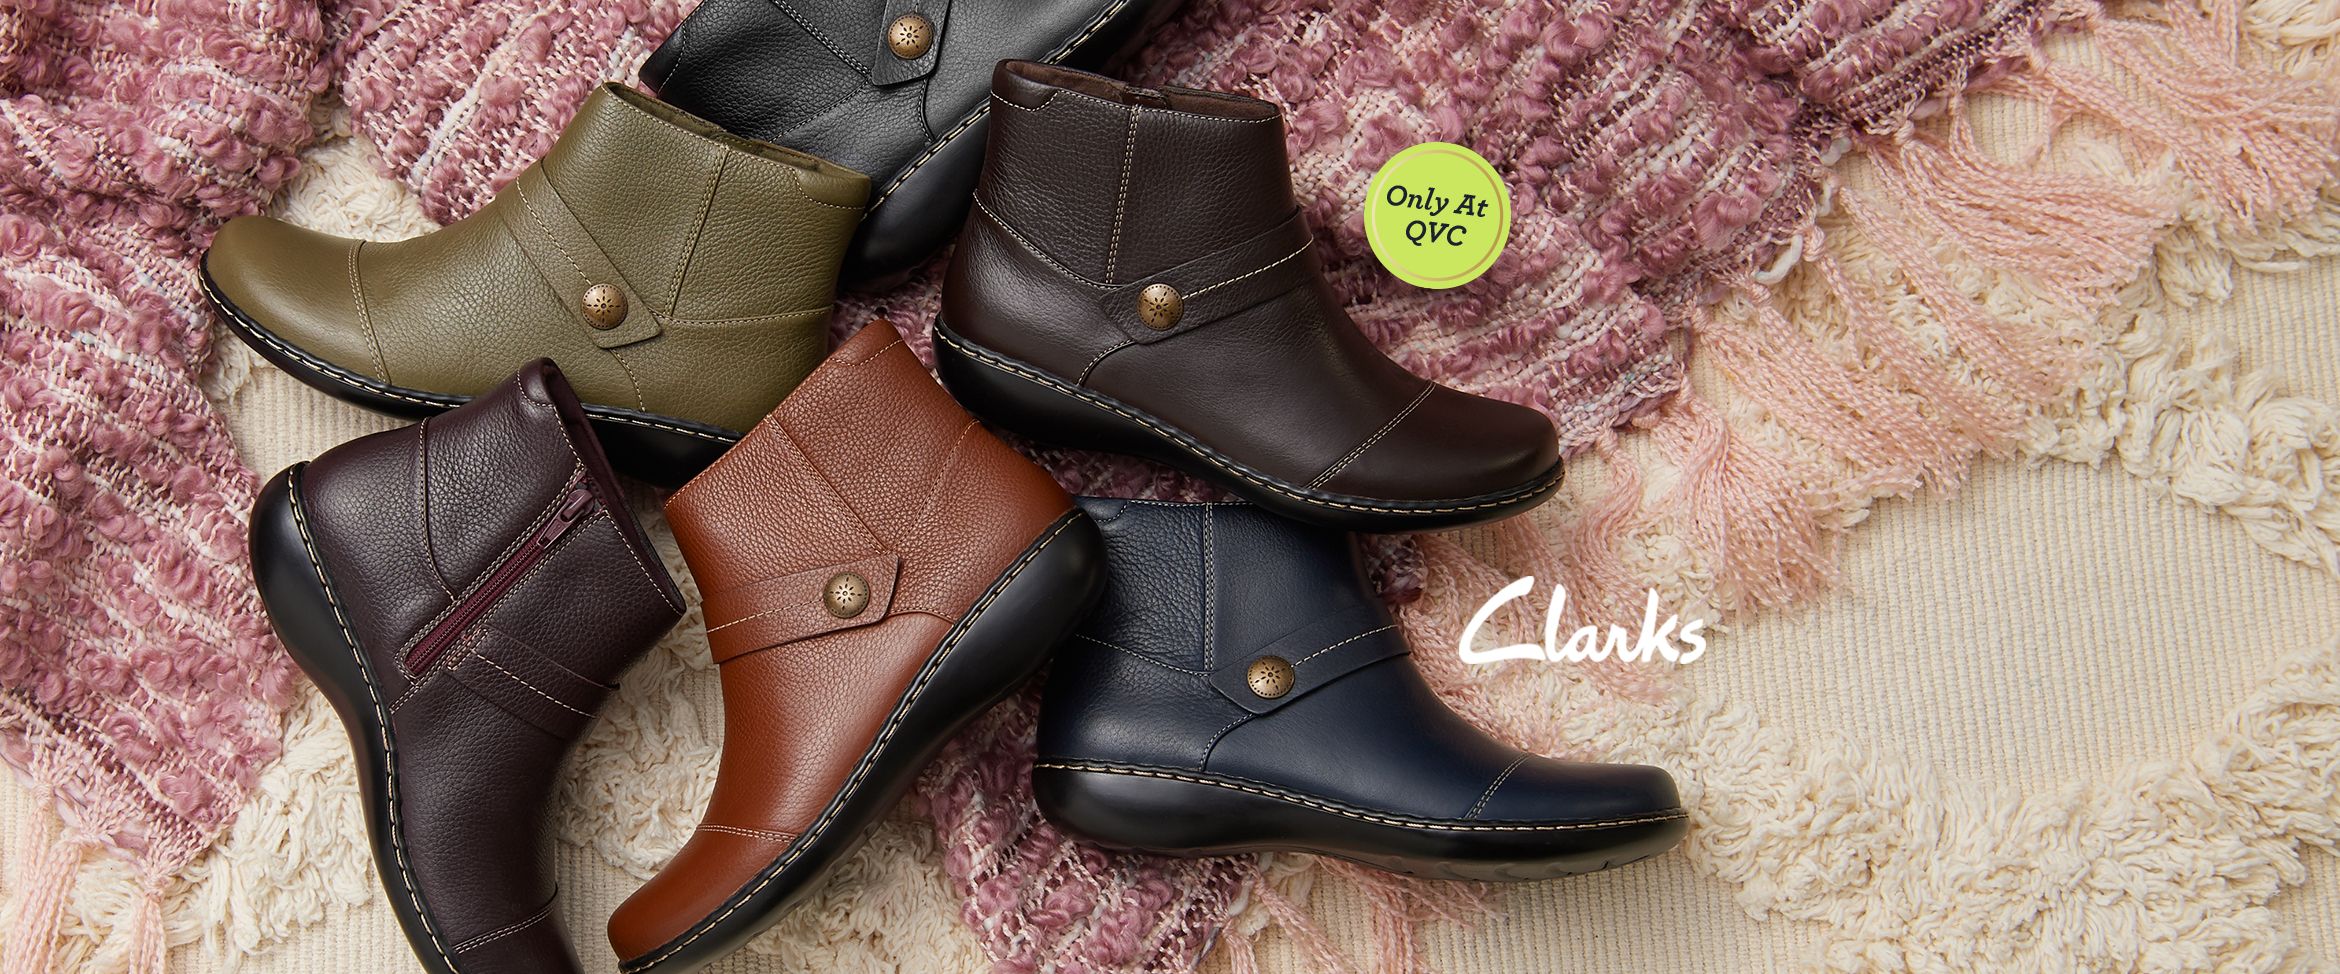 clarks ankle boots qvc